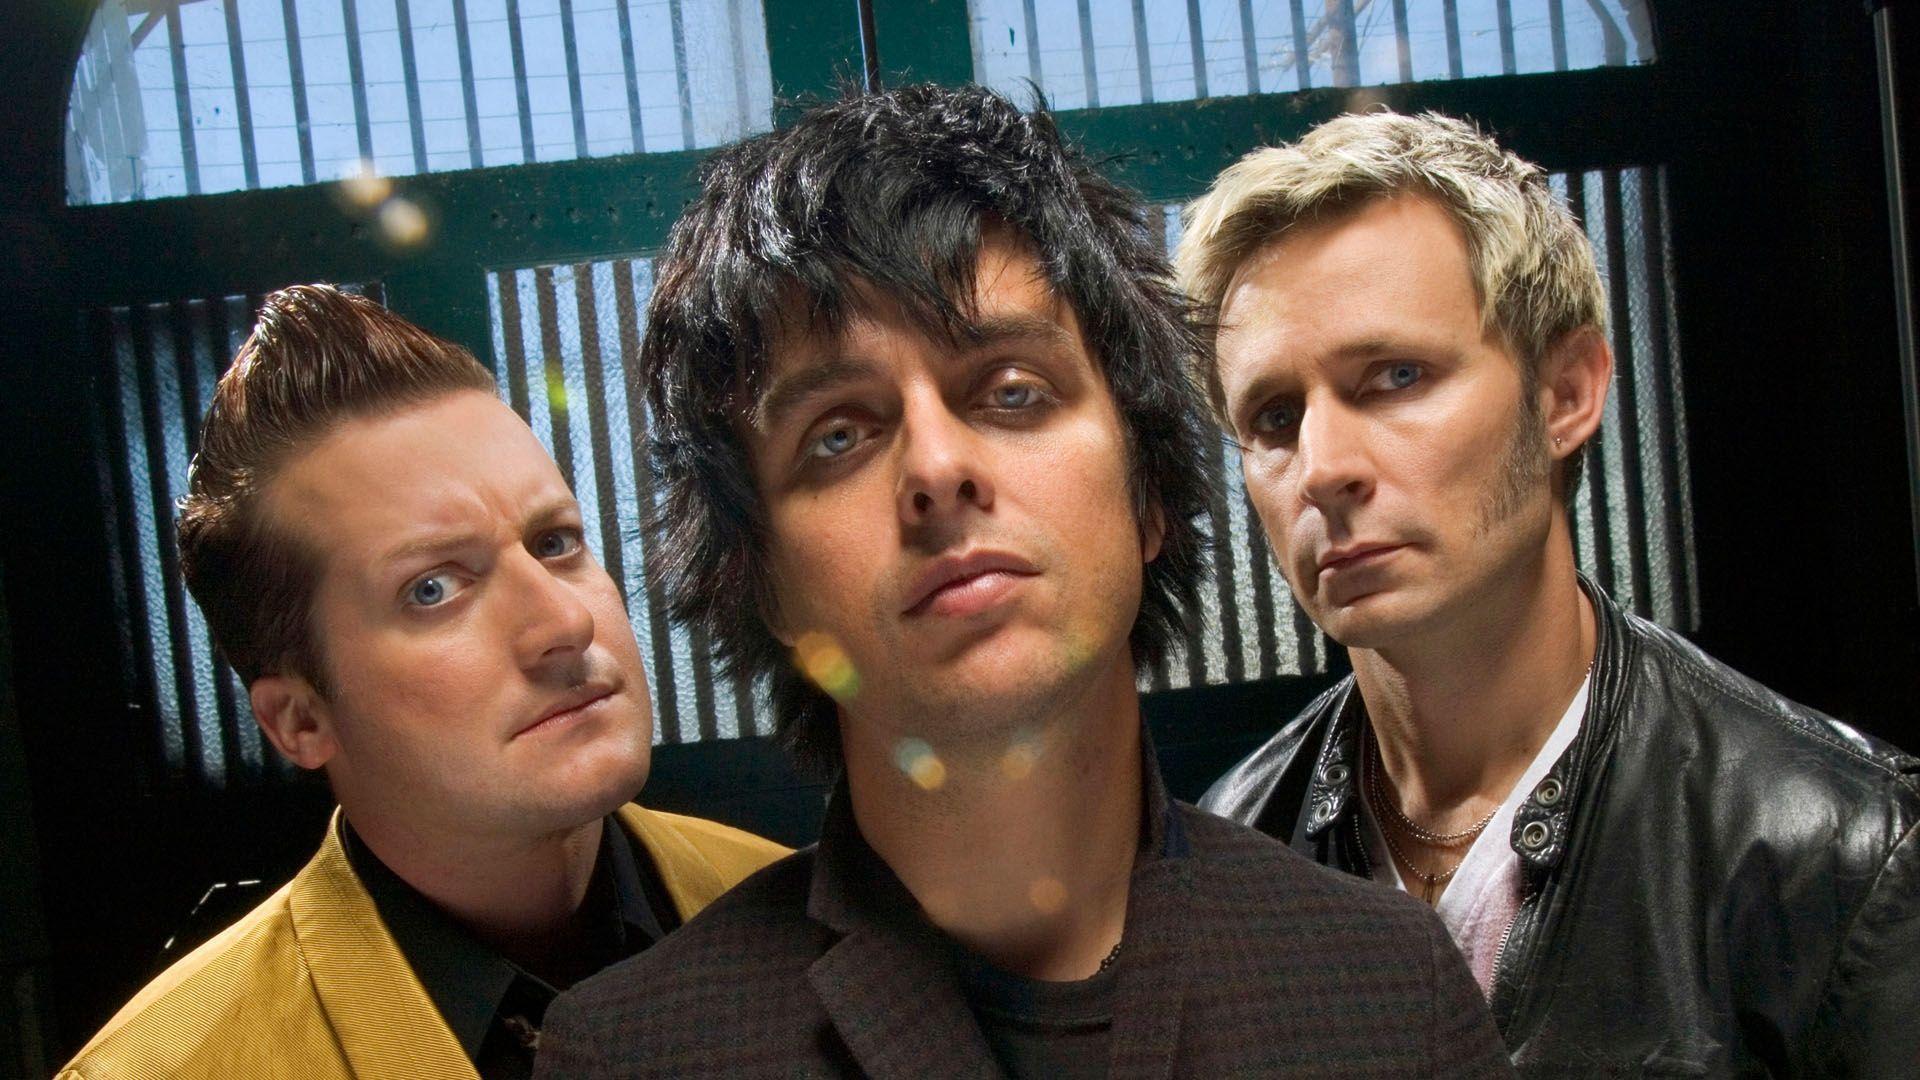 Green Day Members Faces Wallpapers 1920x1080 px Free Download